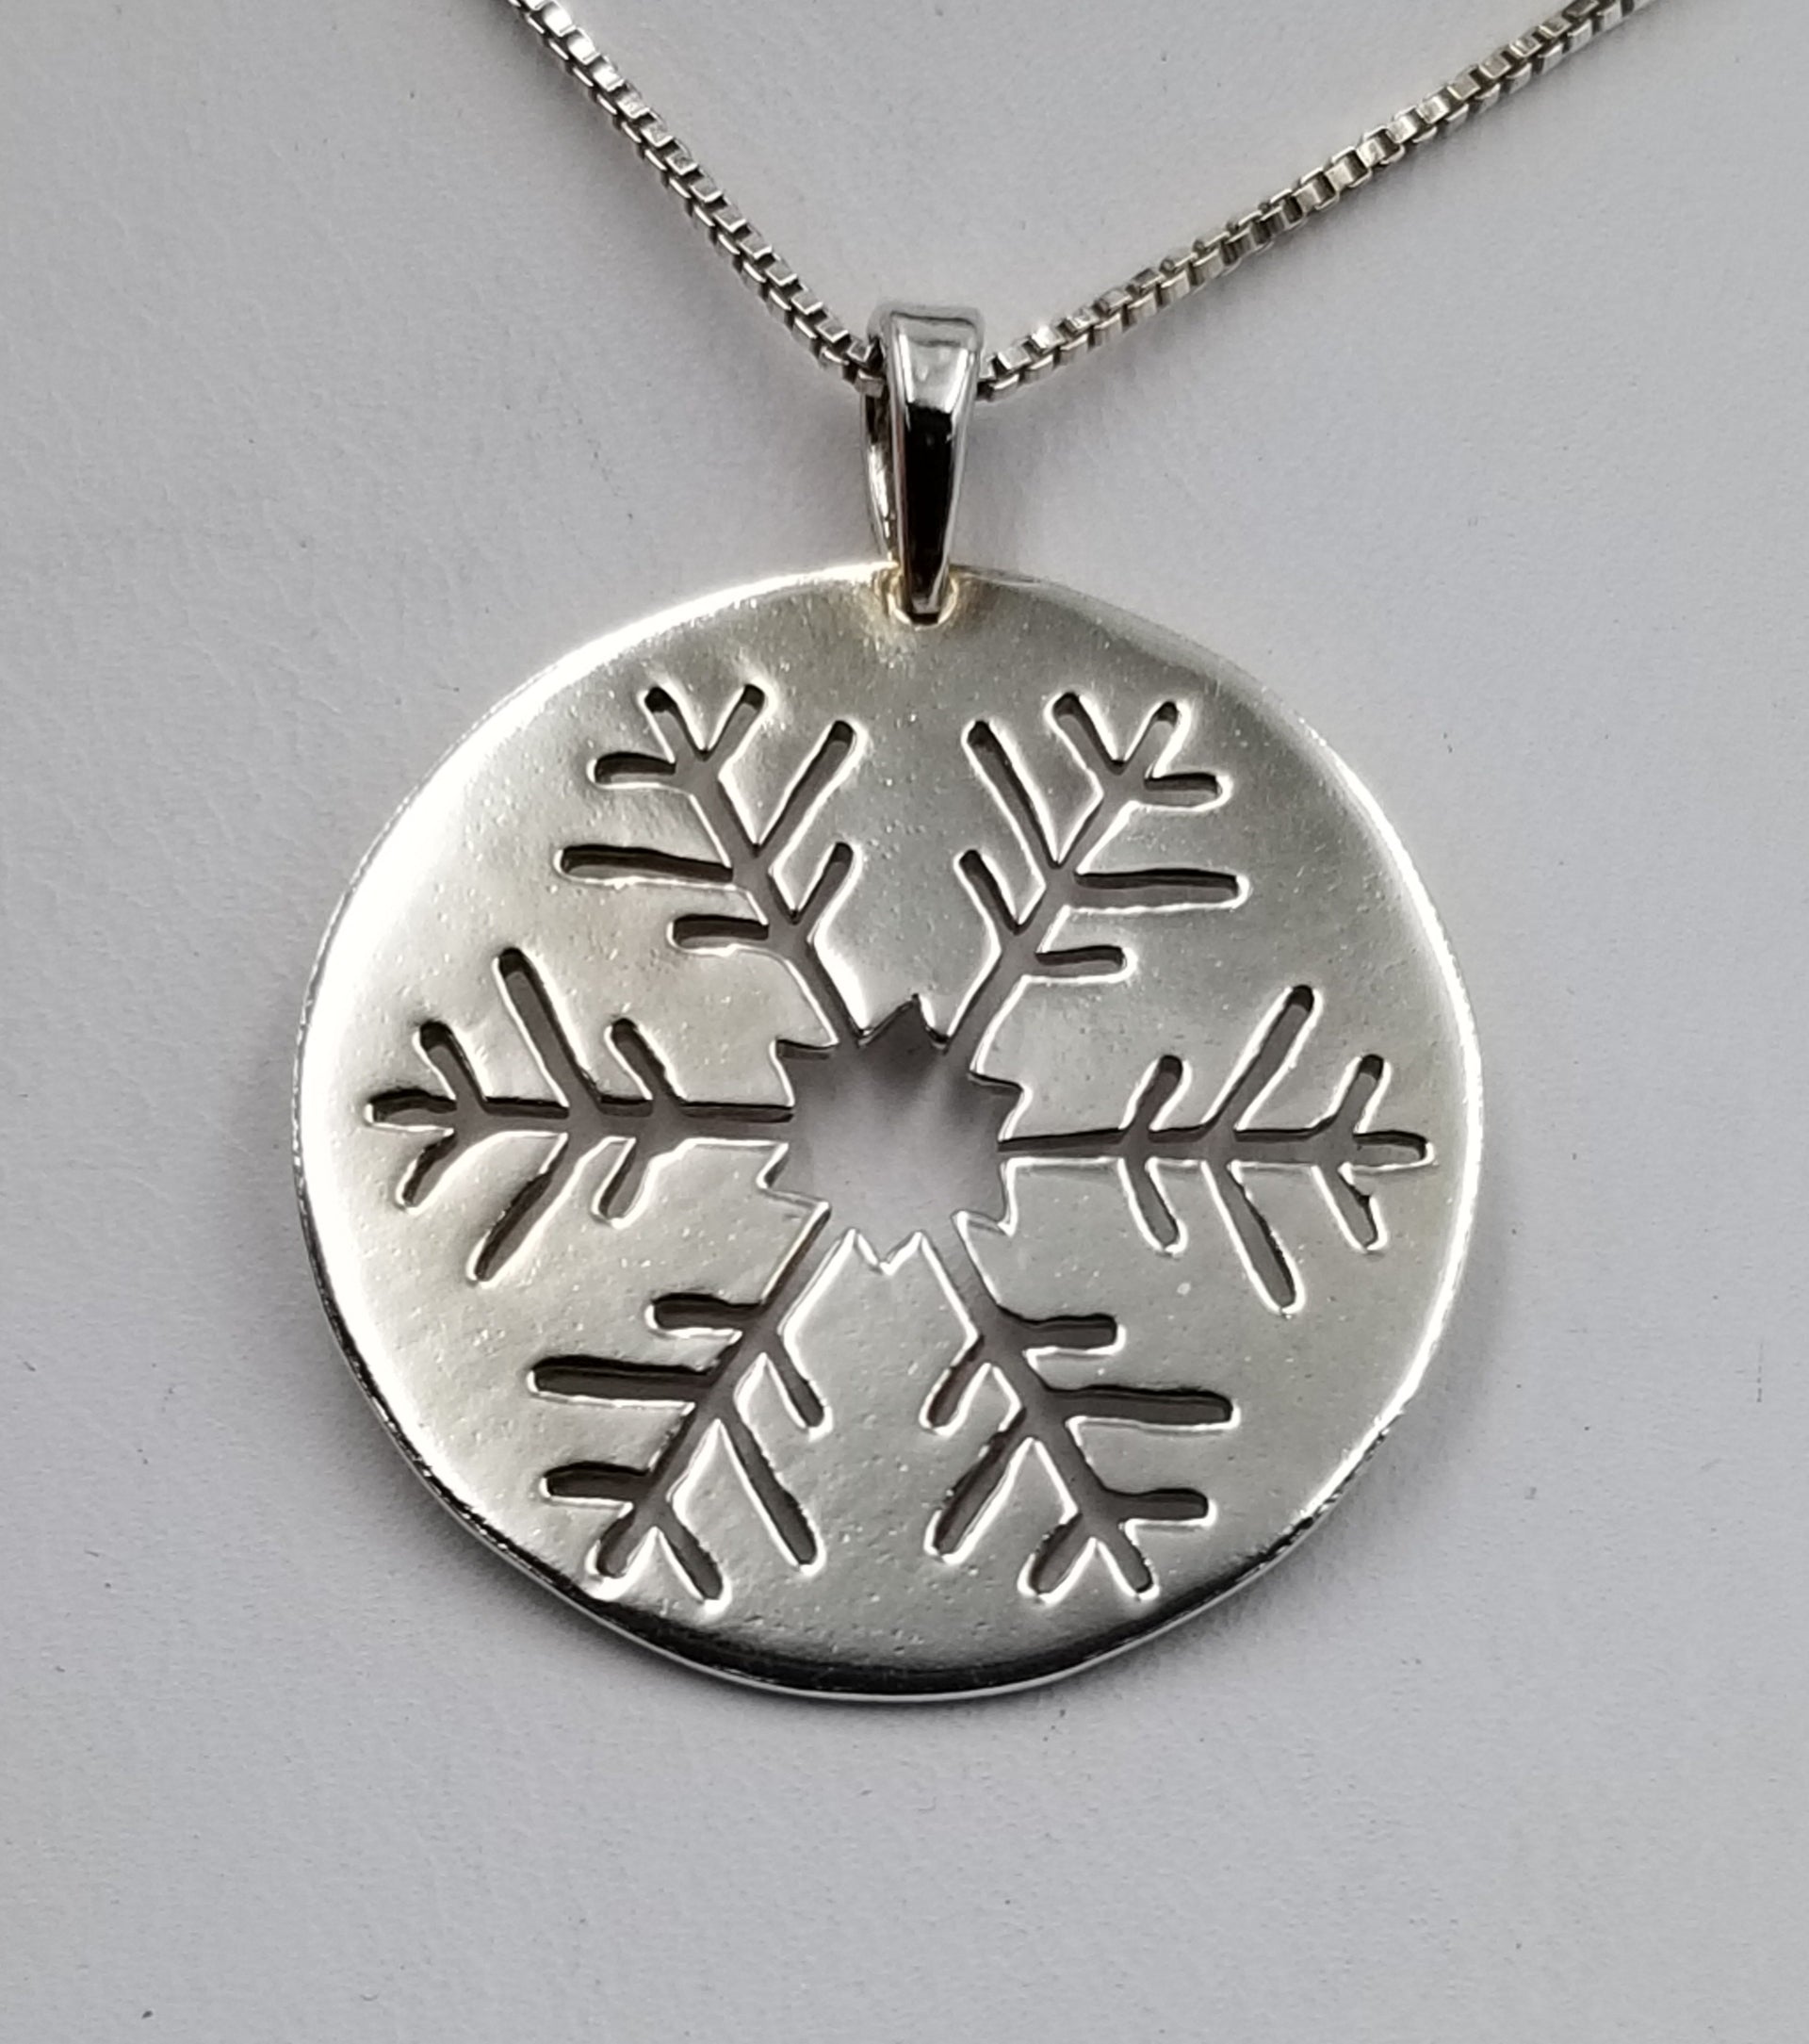 Snowflake winter lover 1" diameter sterling silver necklace jewelry snow lover pendant holiday birthday gift free chain and gift box